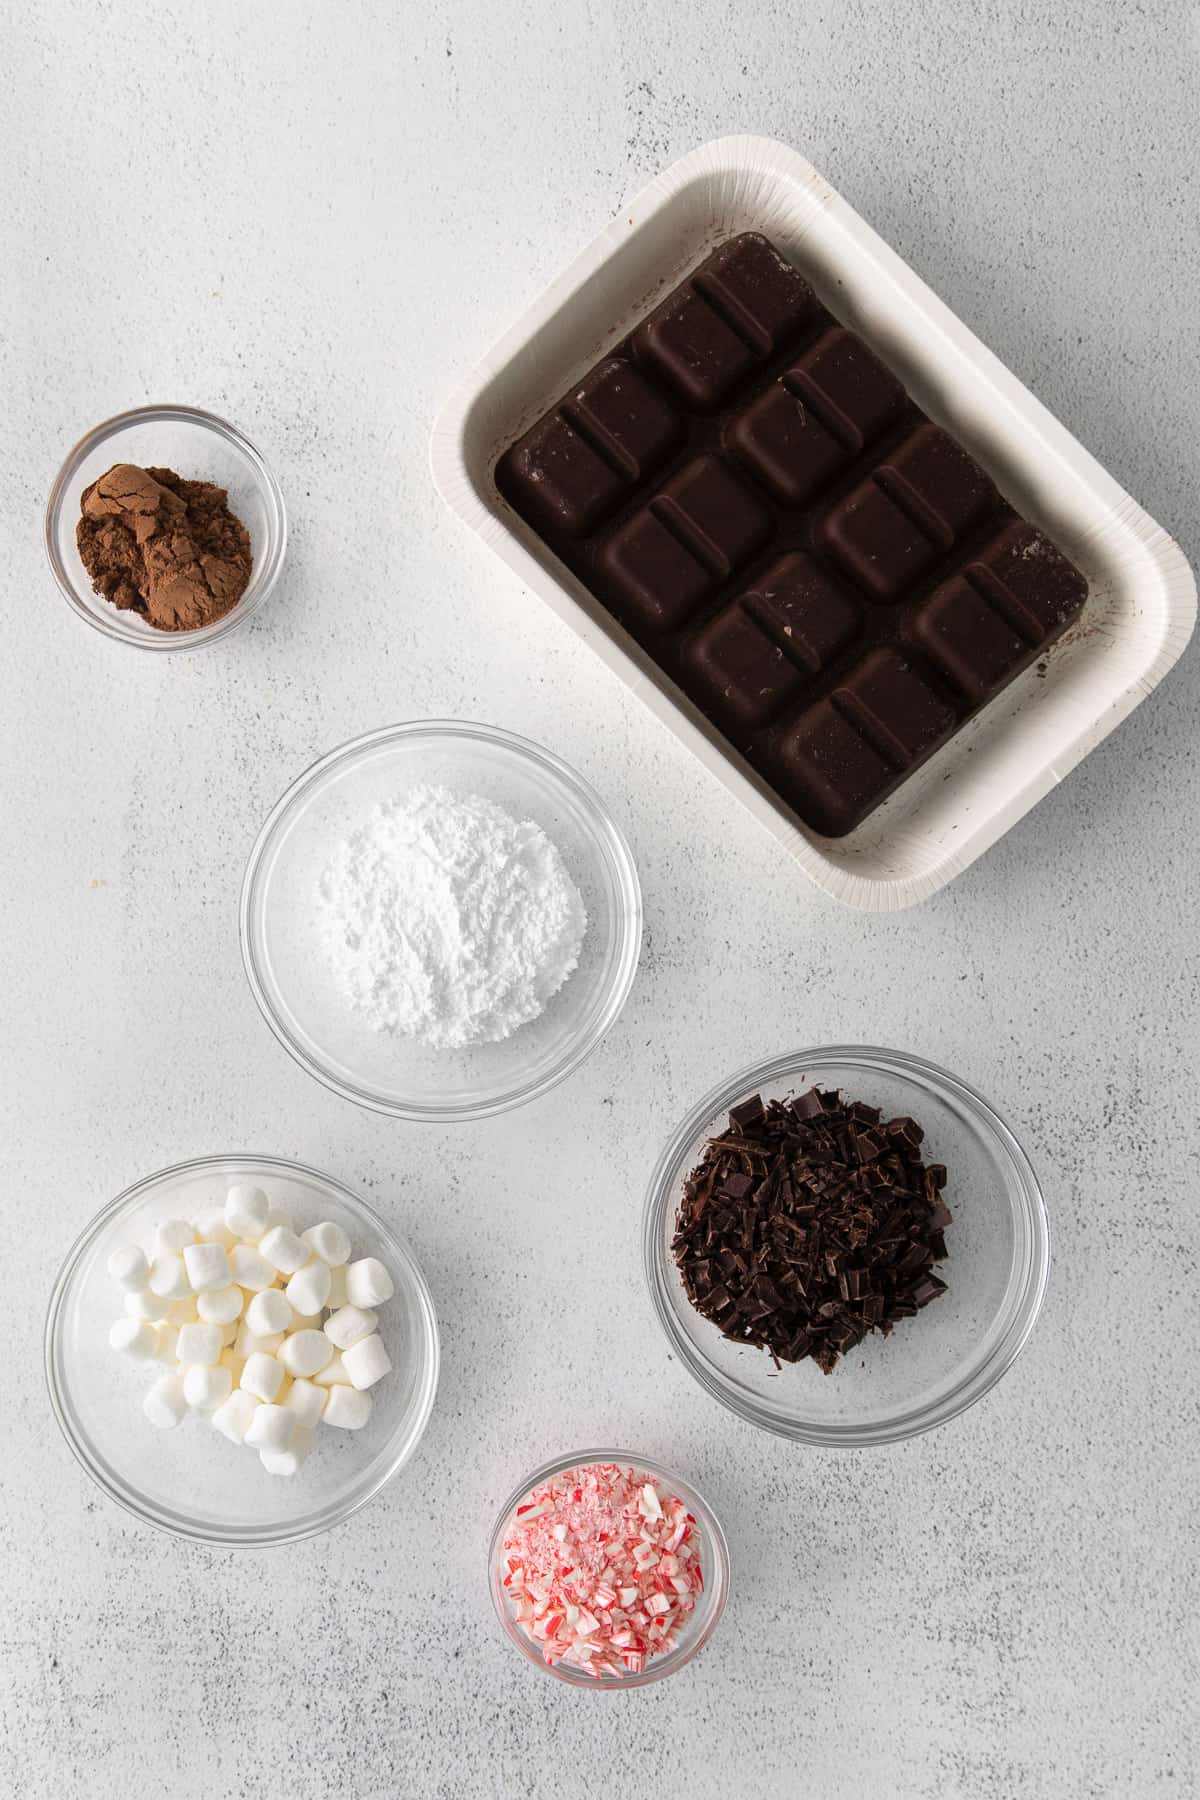 Ingredients for making peppermint hot cocoa bombs.